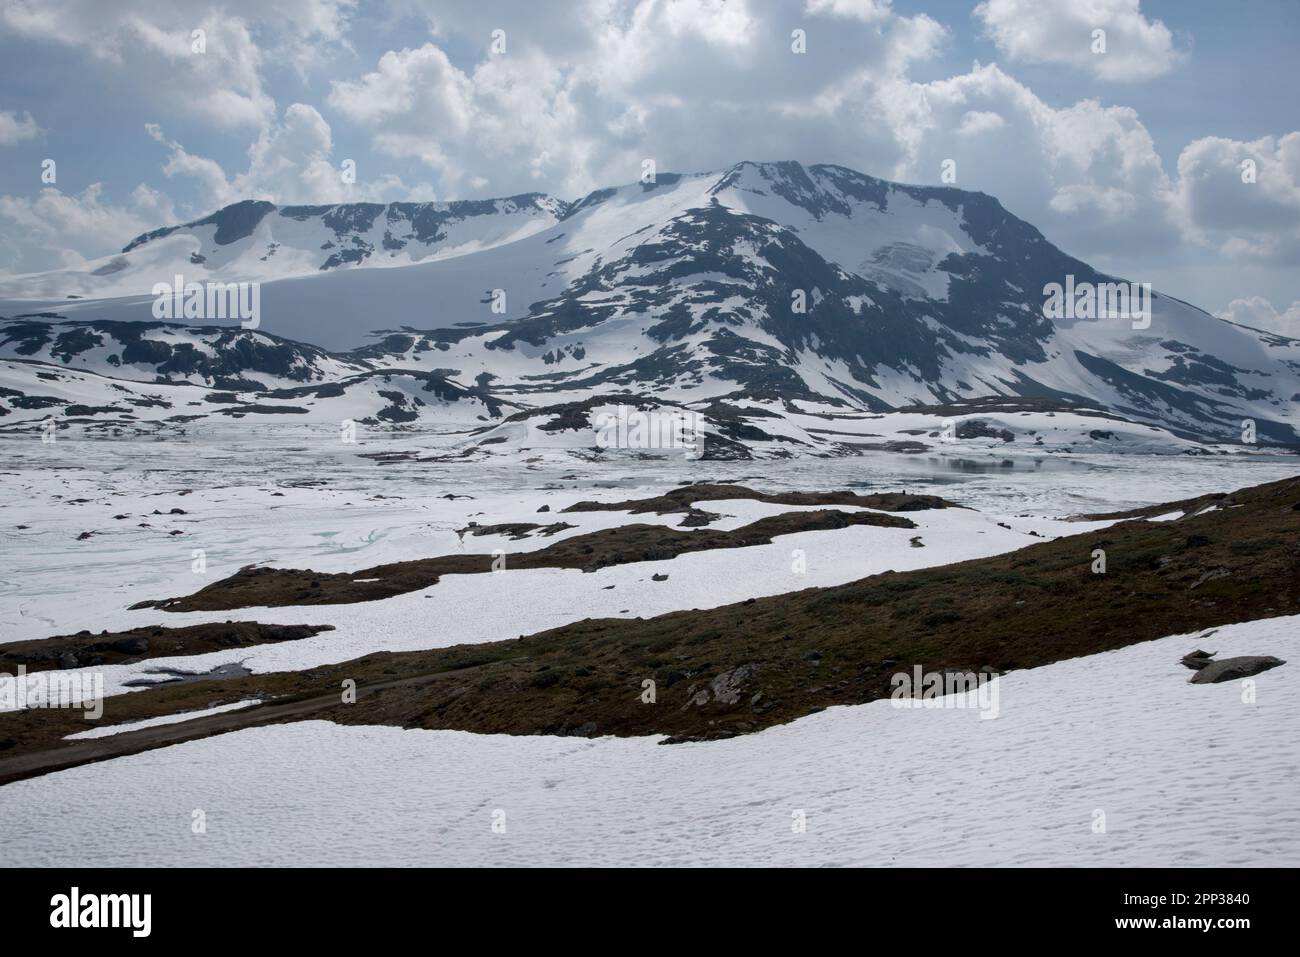 fjell at Fantesteinen in Jotunheimen with snowfields in central Norway's Innlandet county at 1434 meter amsl. Stock Photo